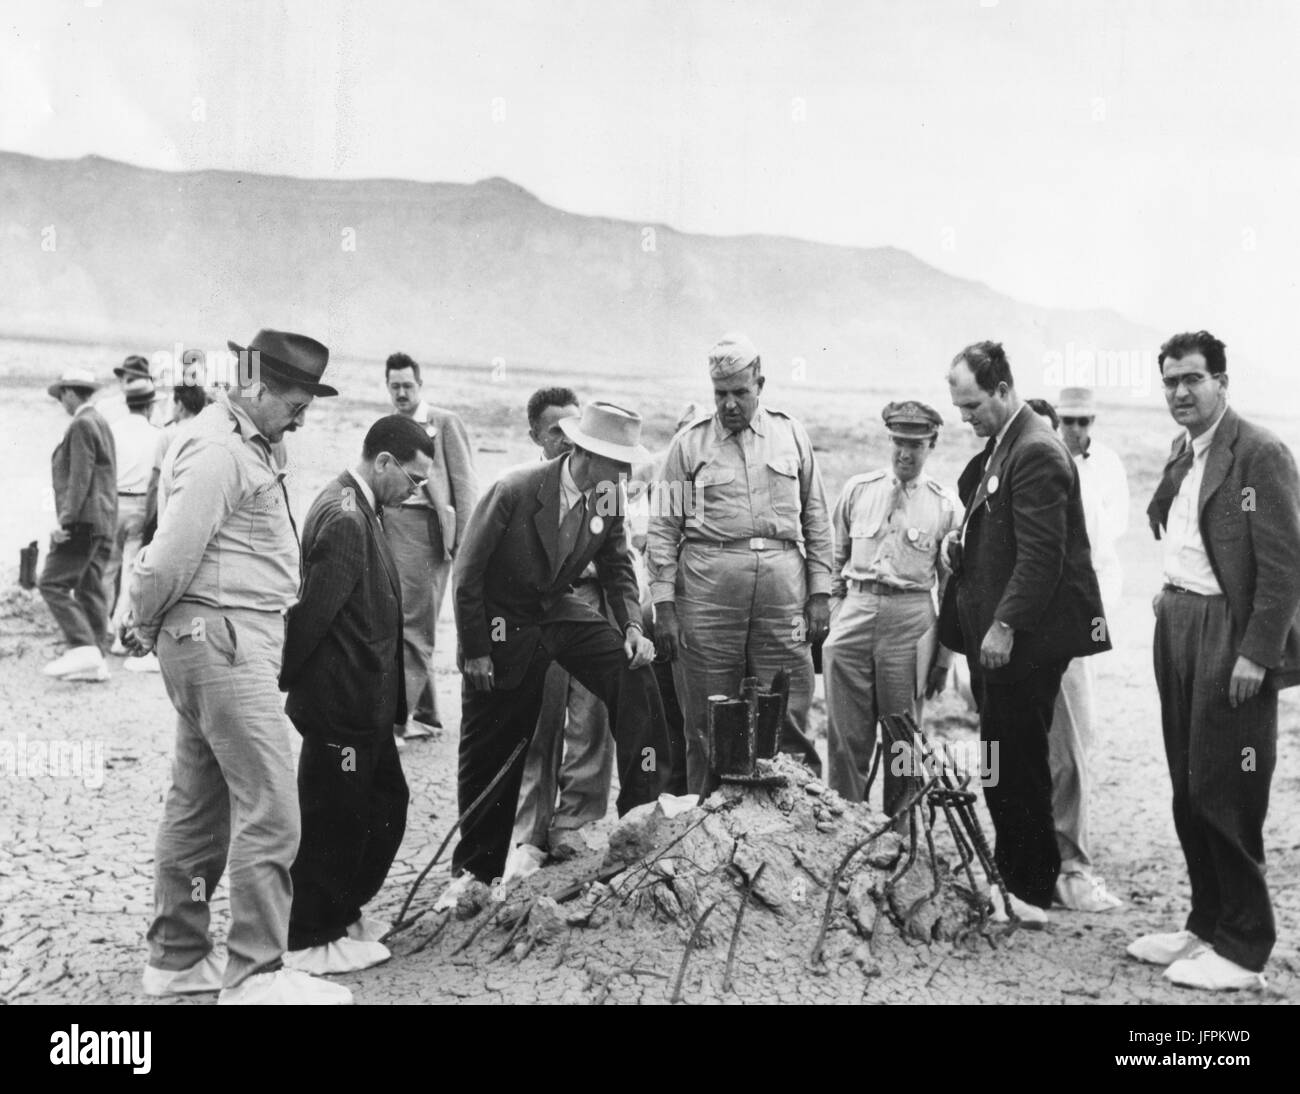 Ground Zero showing the melted remains of the atomic bomb tower after the first atomic test viewed by Dr. J. R. Oppenheimer, Director of Los Alamos Atomic Bomb Project and Physicist, (center with light hat)  and Maj General Leslie R. Groves (center), Chief of Manhattan Engineering District, . July, 1945. Alamogordo, NM, July 16, 1945 Stock Photo